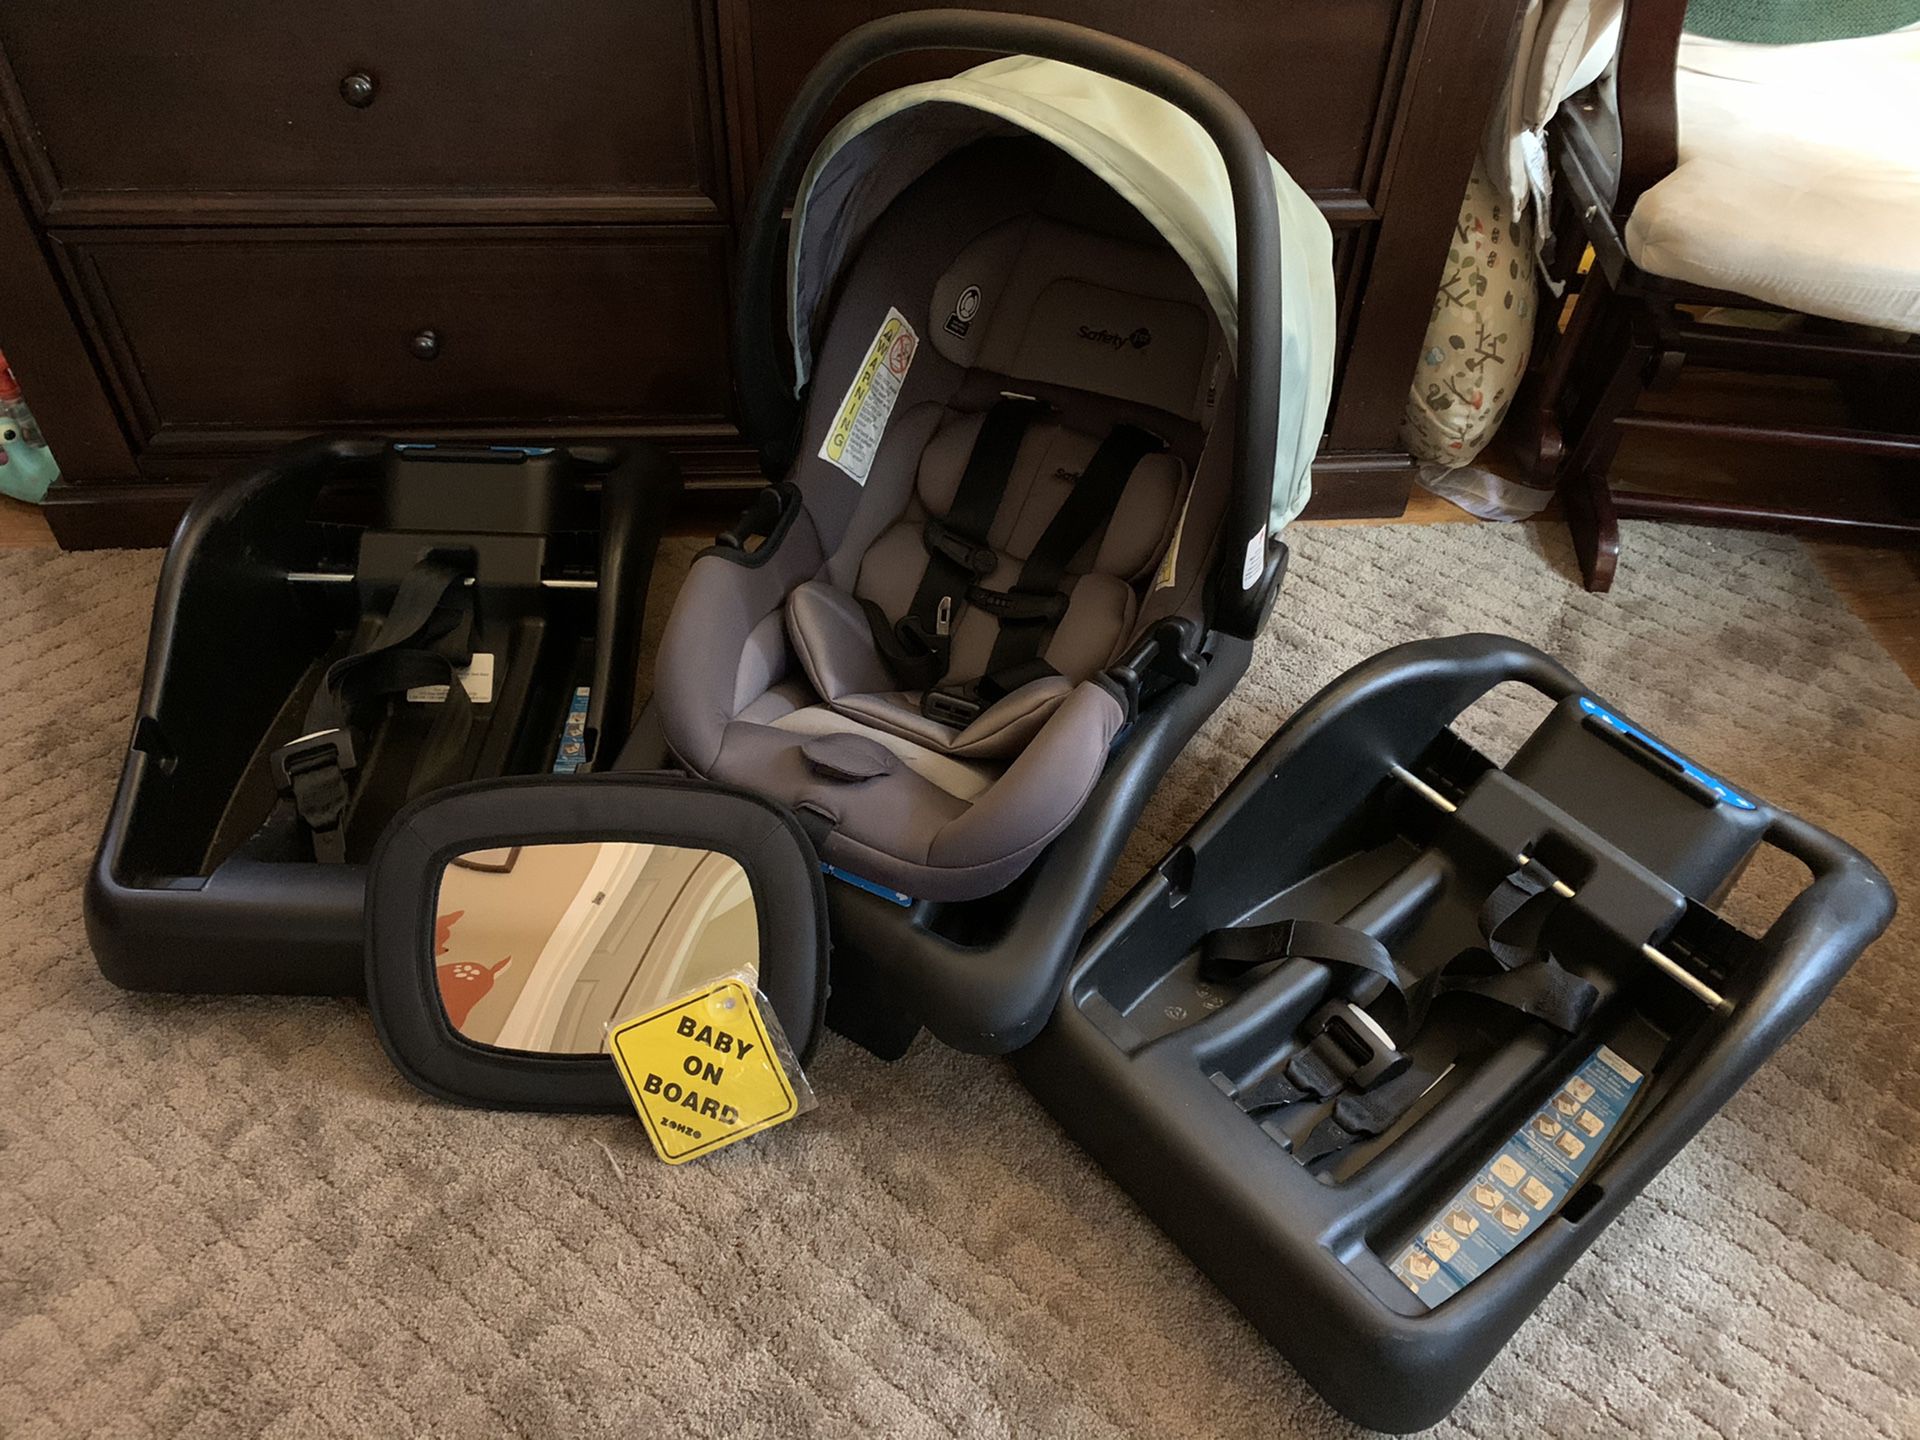 Safety first onboard35 LT infant car seat